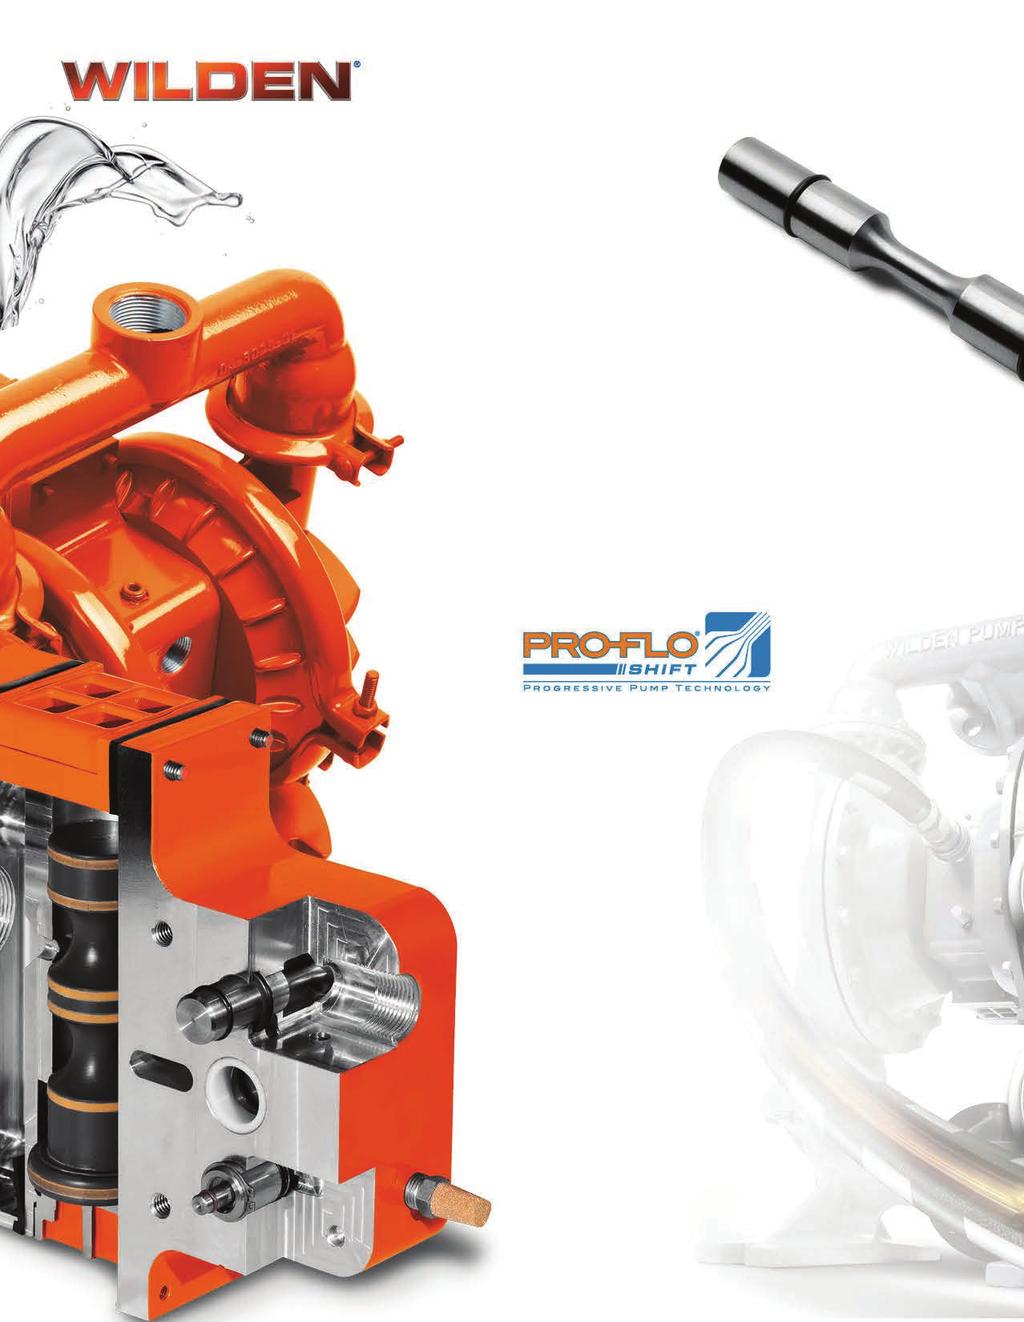 STATE OF THE ART Air Distribution System The Pro-Flo SHIFT is the new standard for AODD pumps.